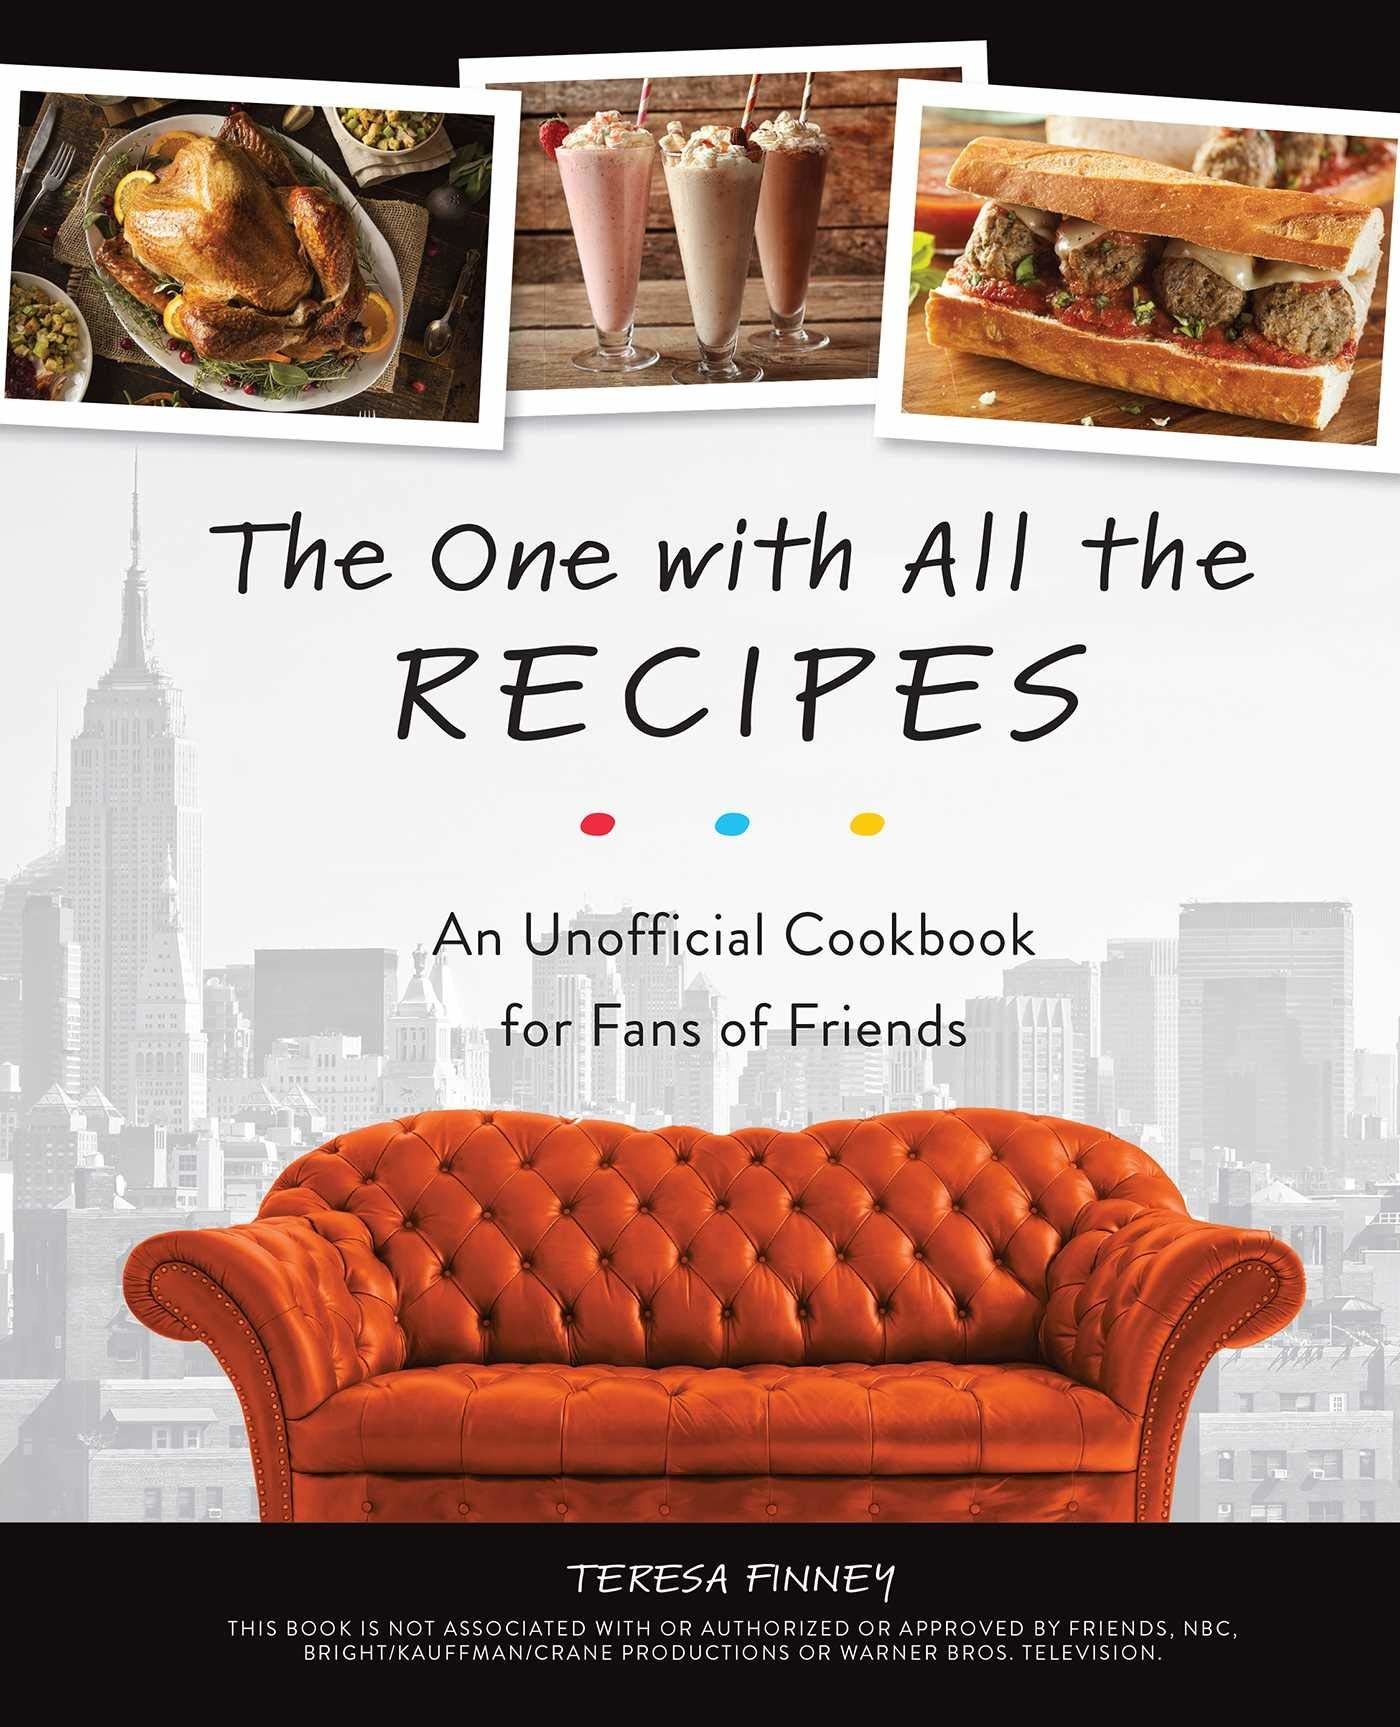 the cover of the one with all the recipes, the unofficial friends-inspired cookbook